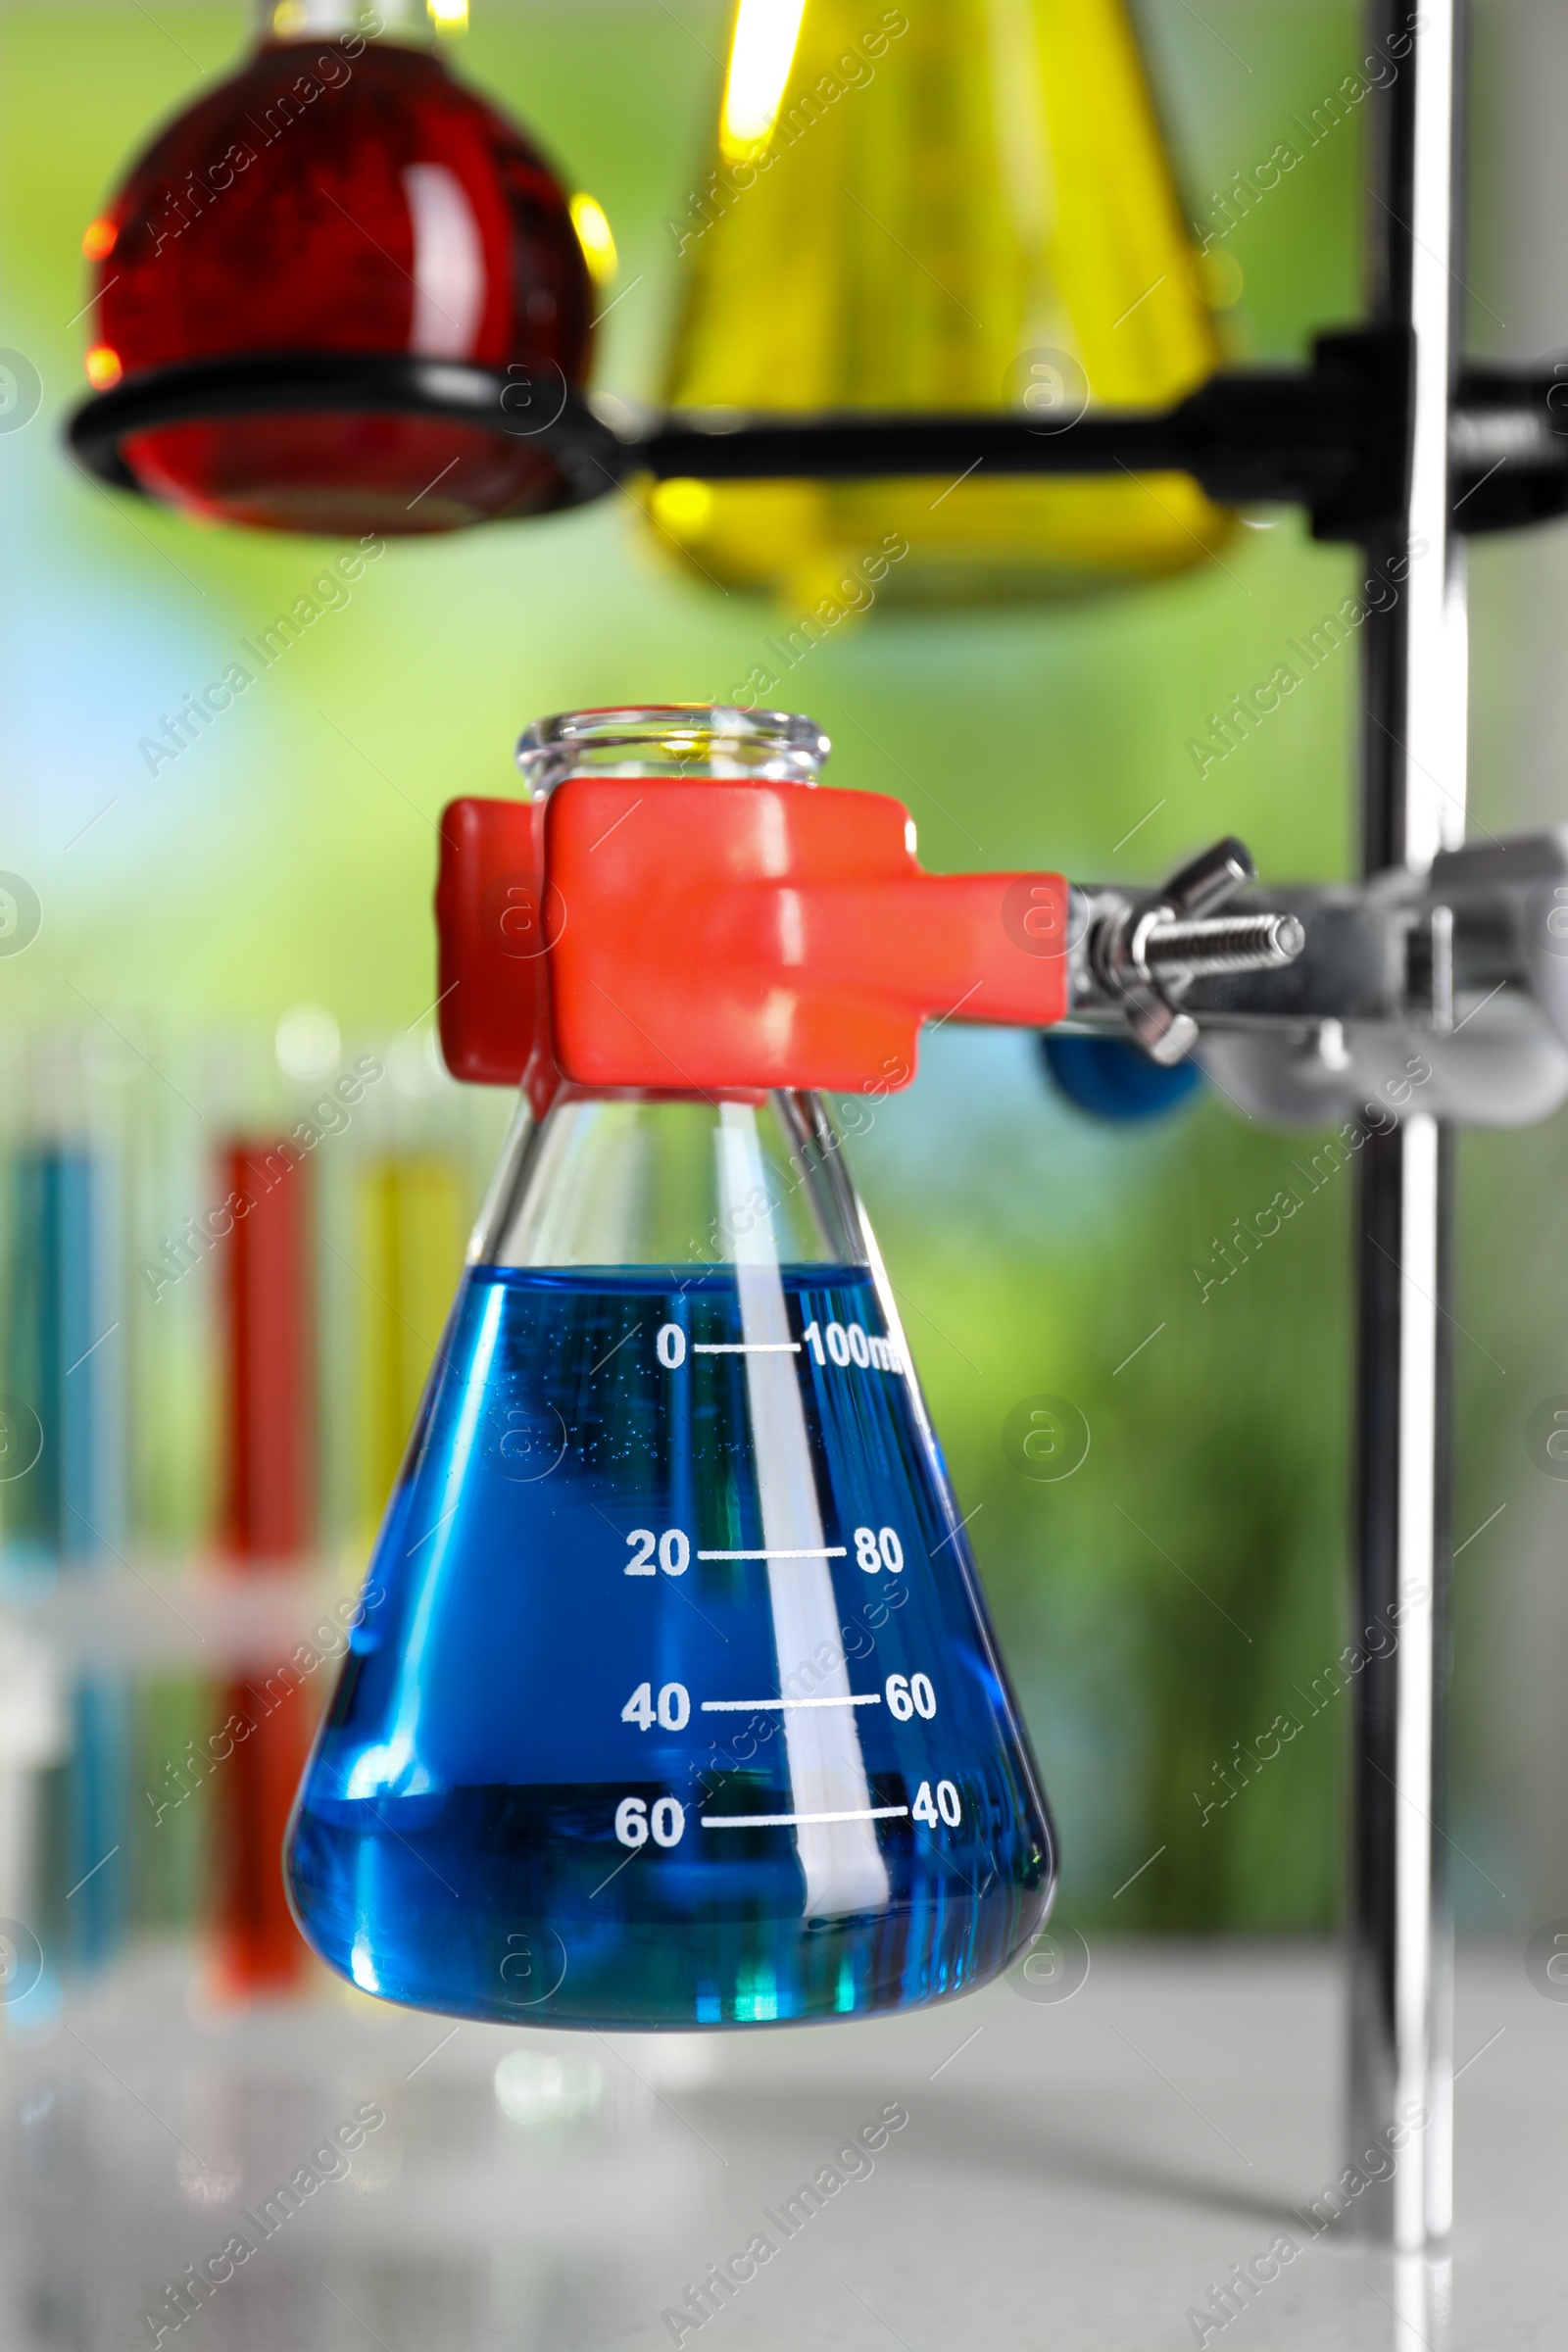 Photo of Retort stand and laboratory flasks with liquids on table against blurred background, closeup